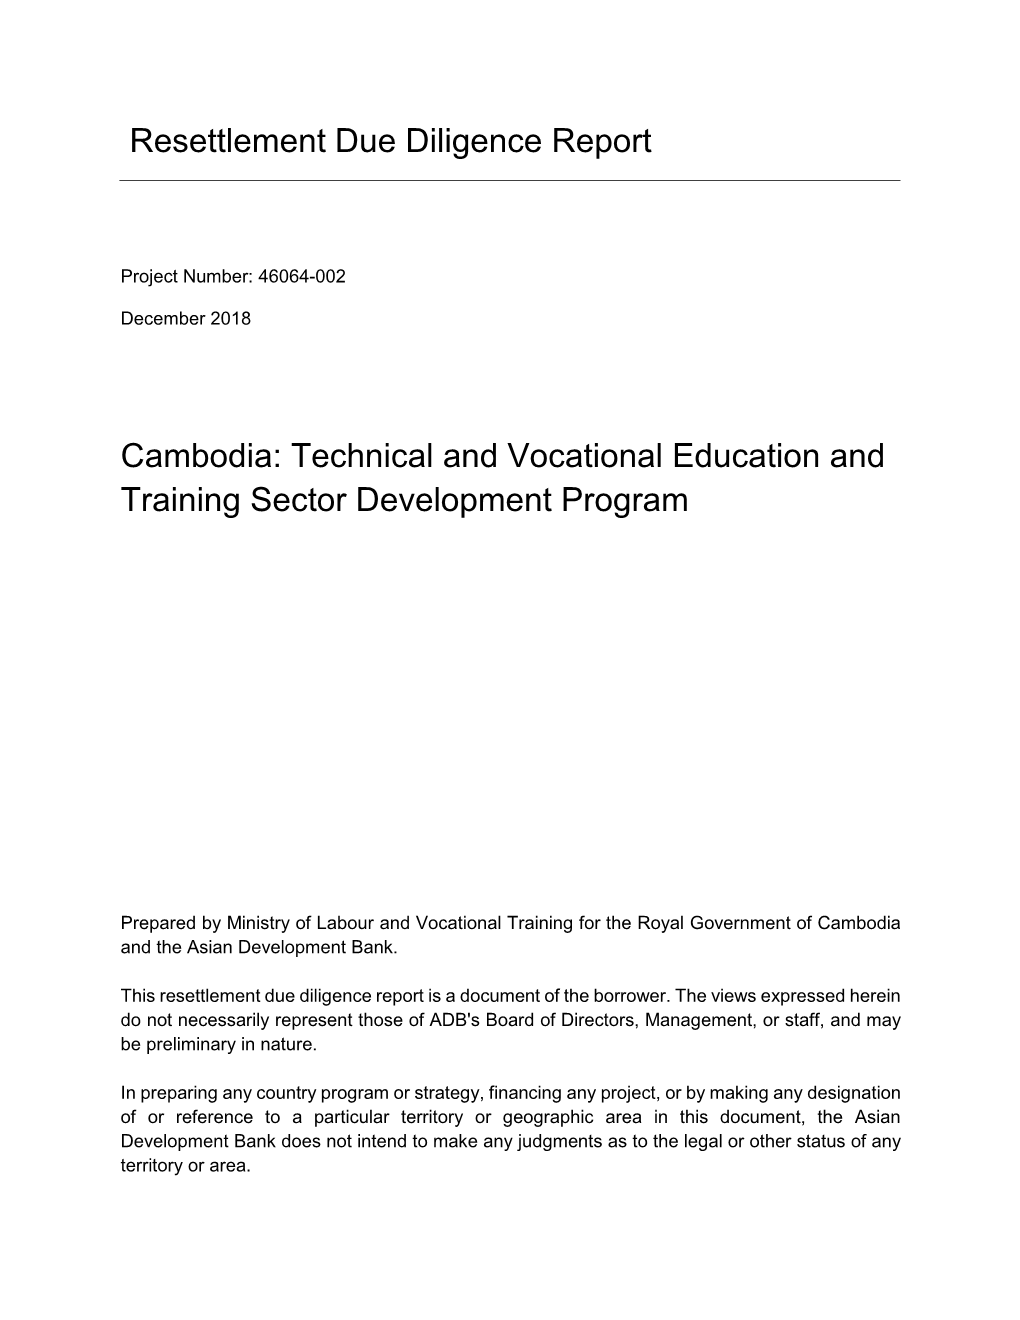 Technical and Vocational Education and Training Sector Development Program